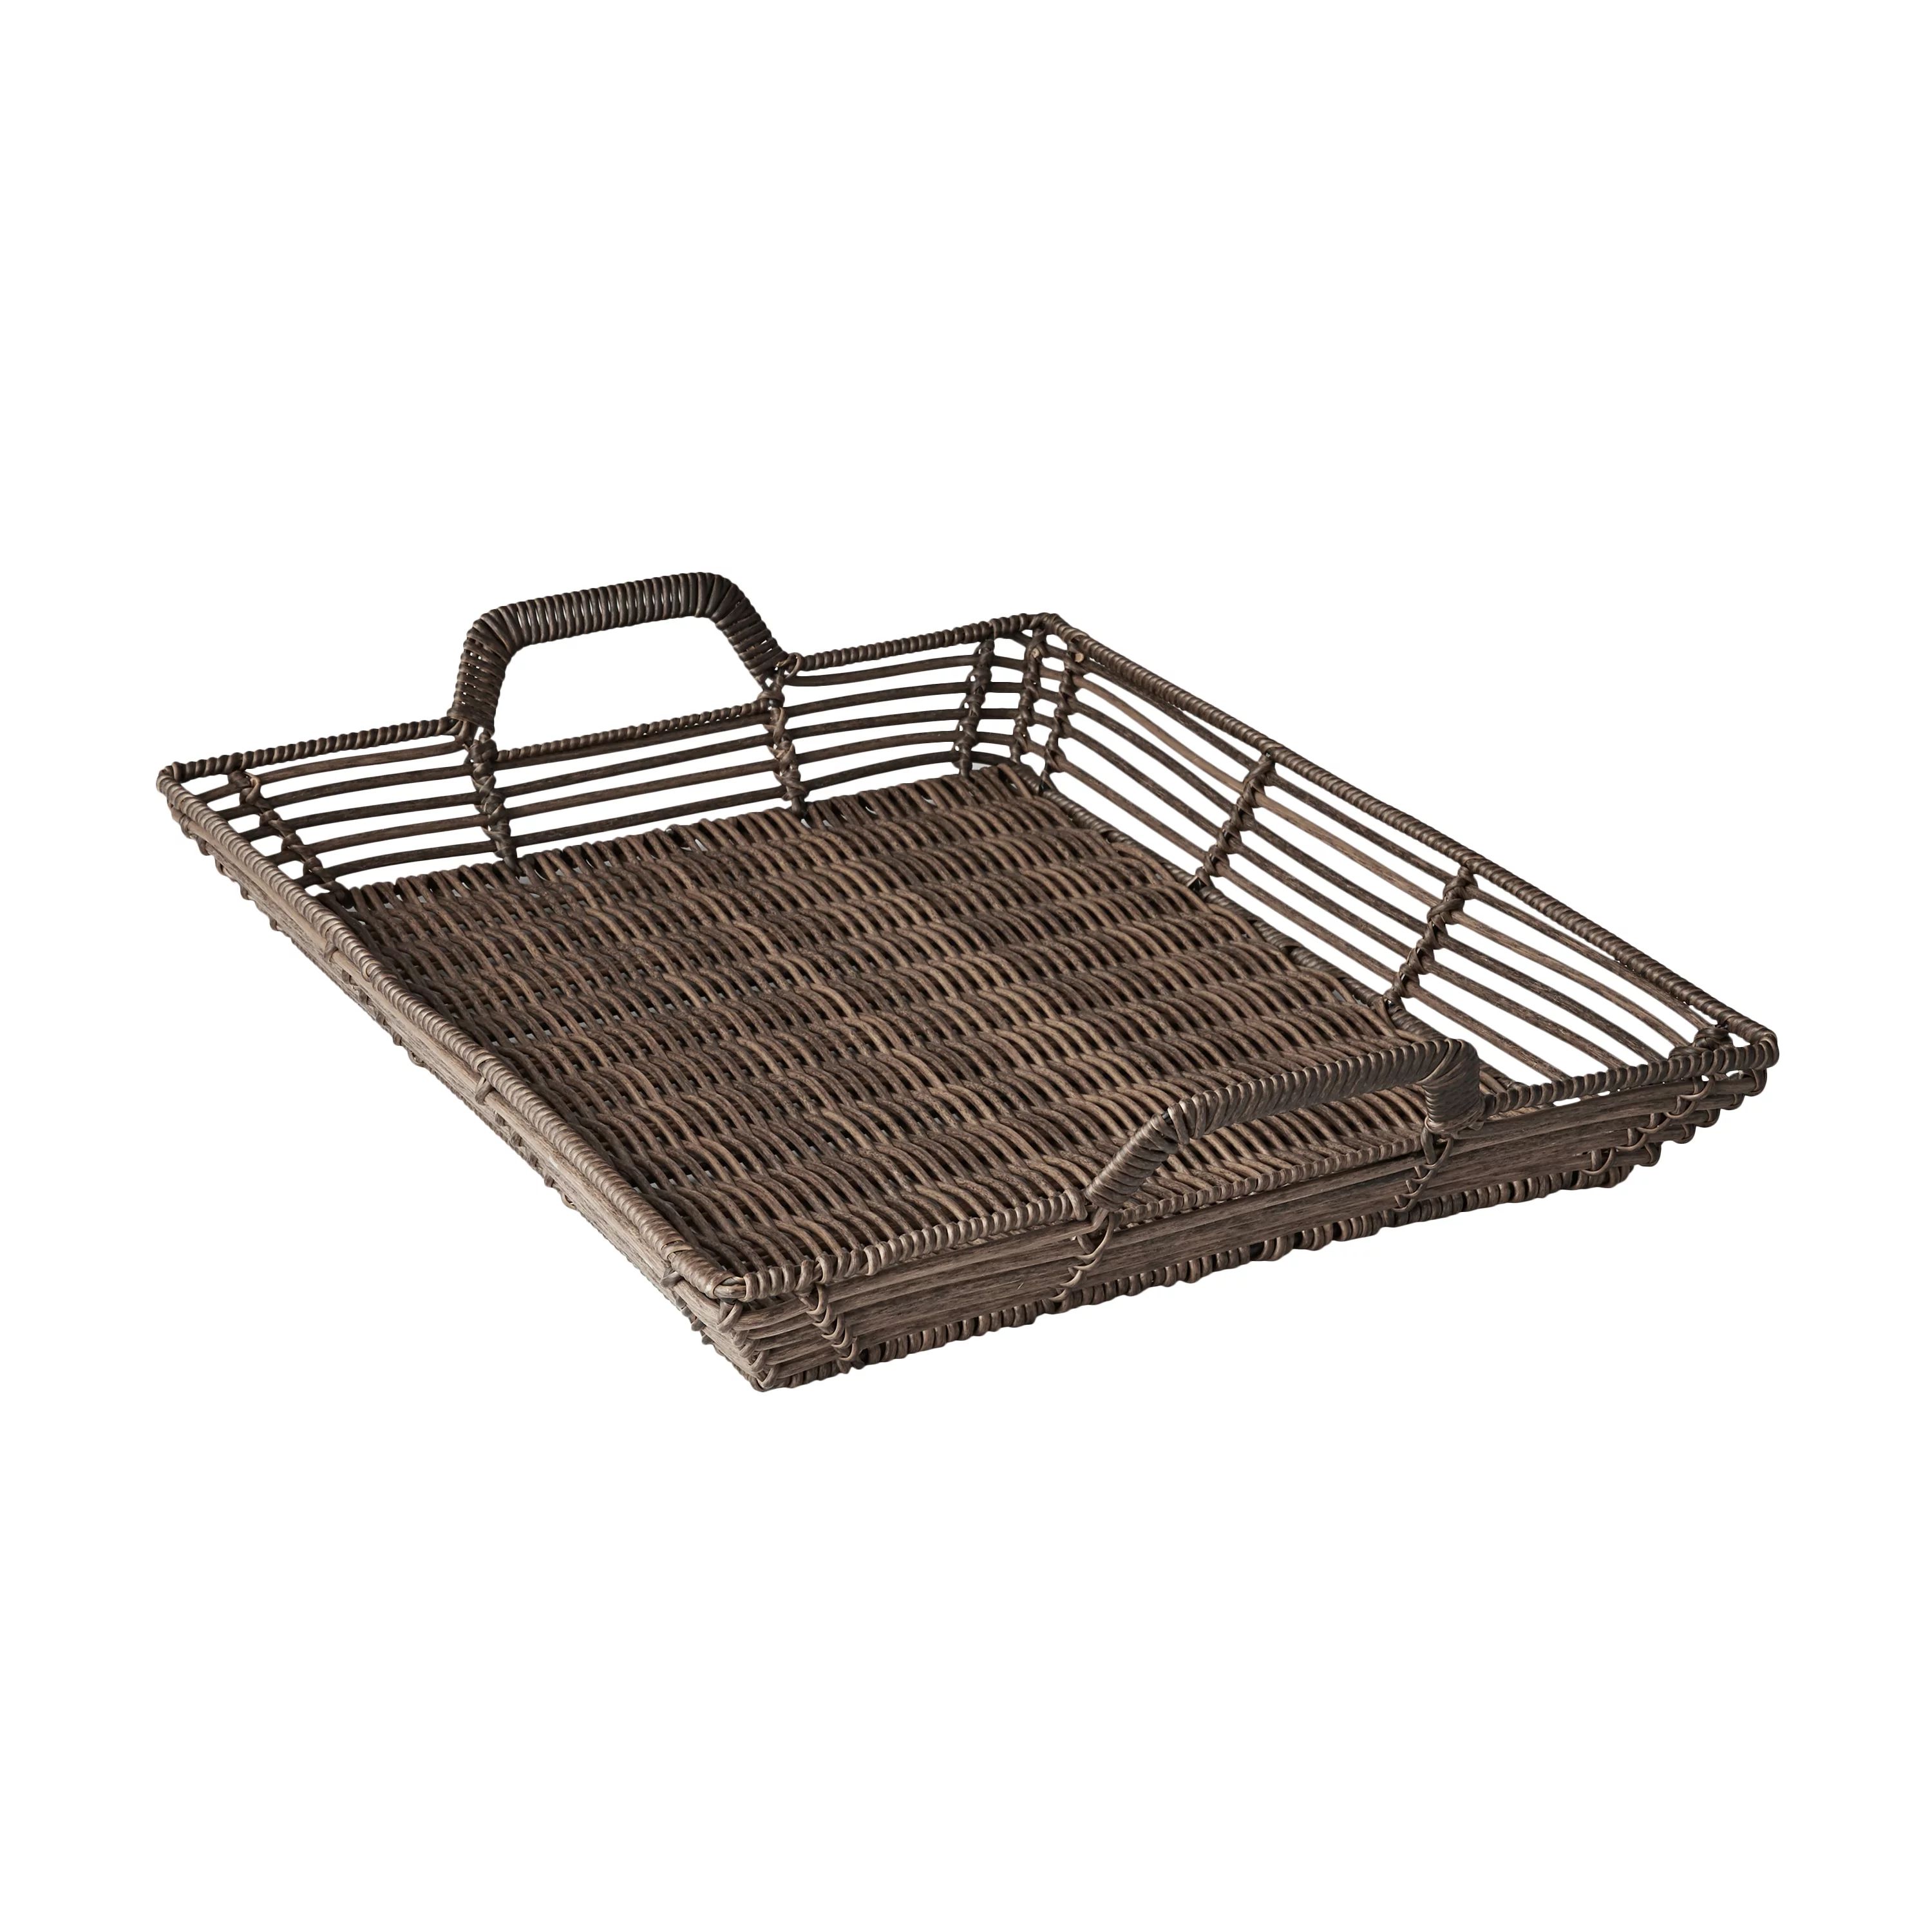 Better Homes & Gardens Woven Rattan Serving Tray with Handles | Walmart (US)